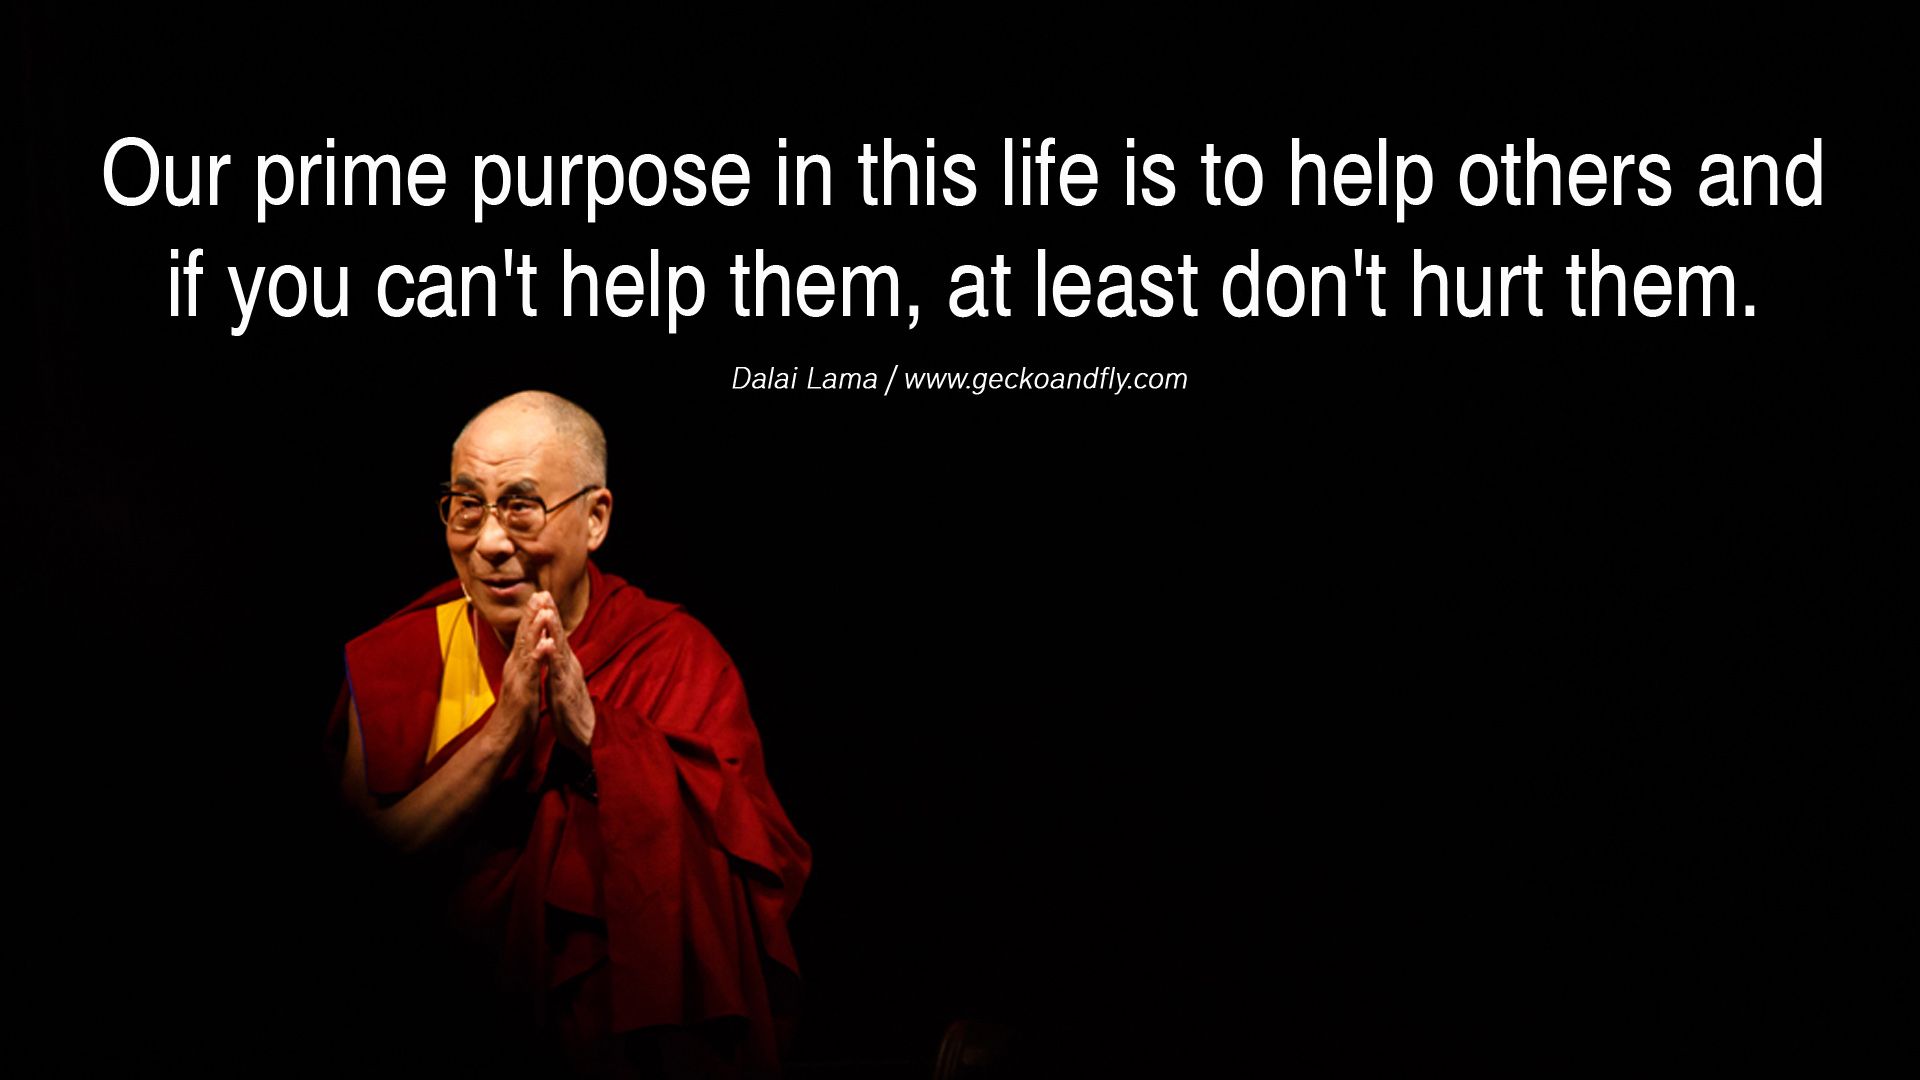 Our-prime-purpose-in-life-is-to-help-others.-And-if-you-can’t-help-them-at-least-don’t-hurt-them.jpg